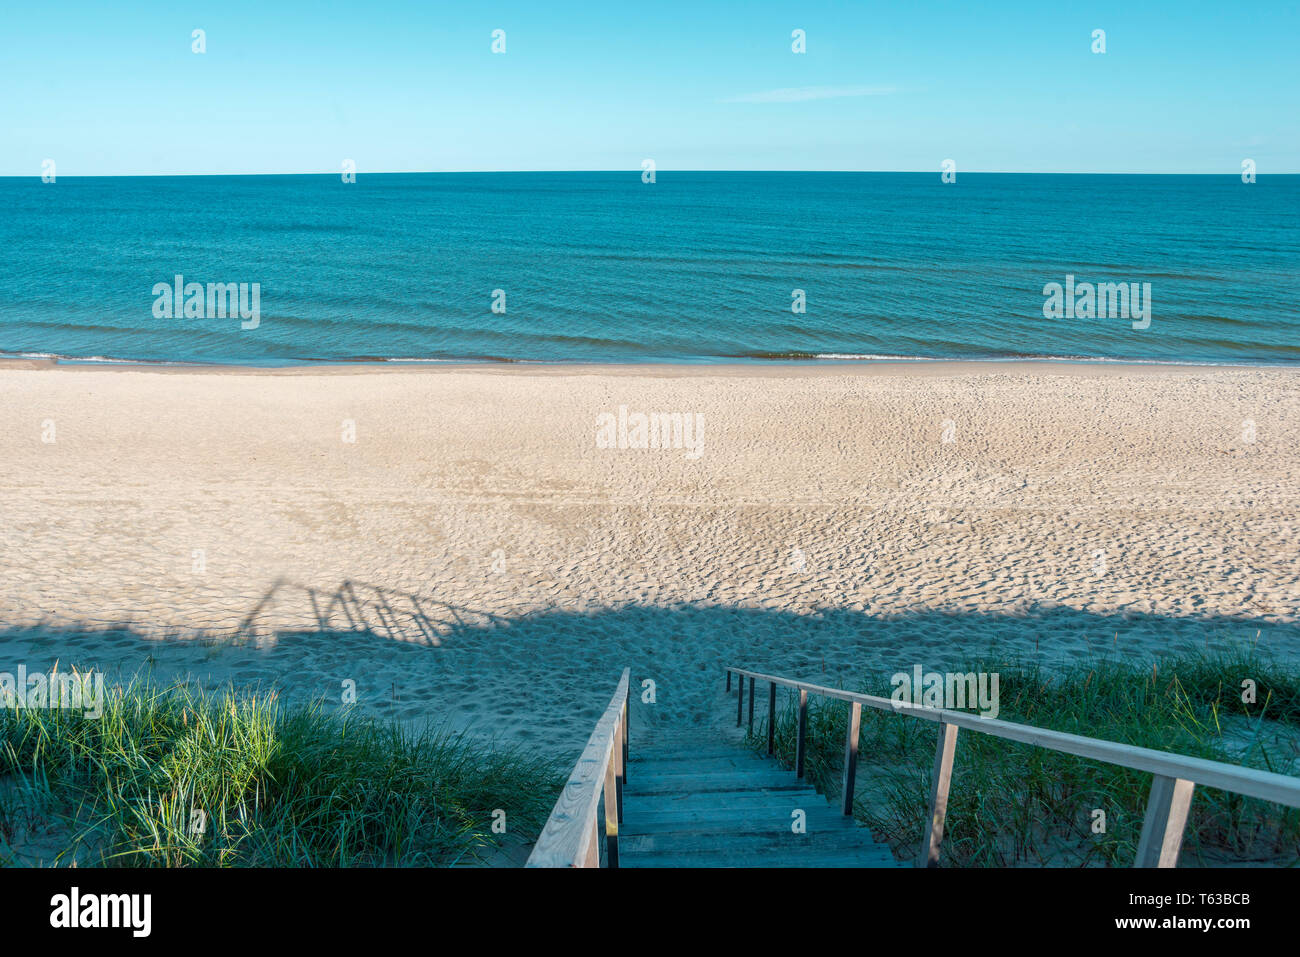 empty beach landscape with wooden stairs going down Stock Photo